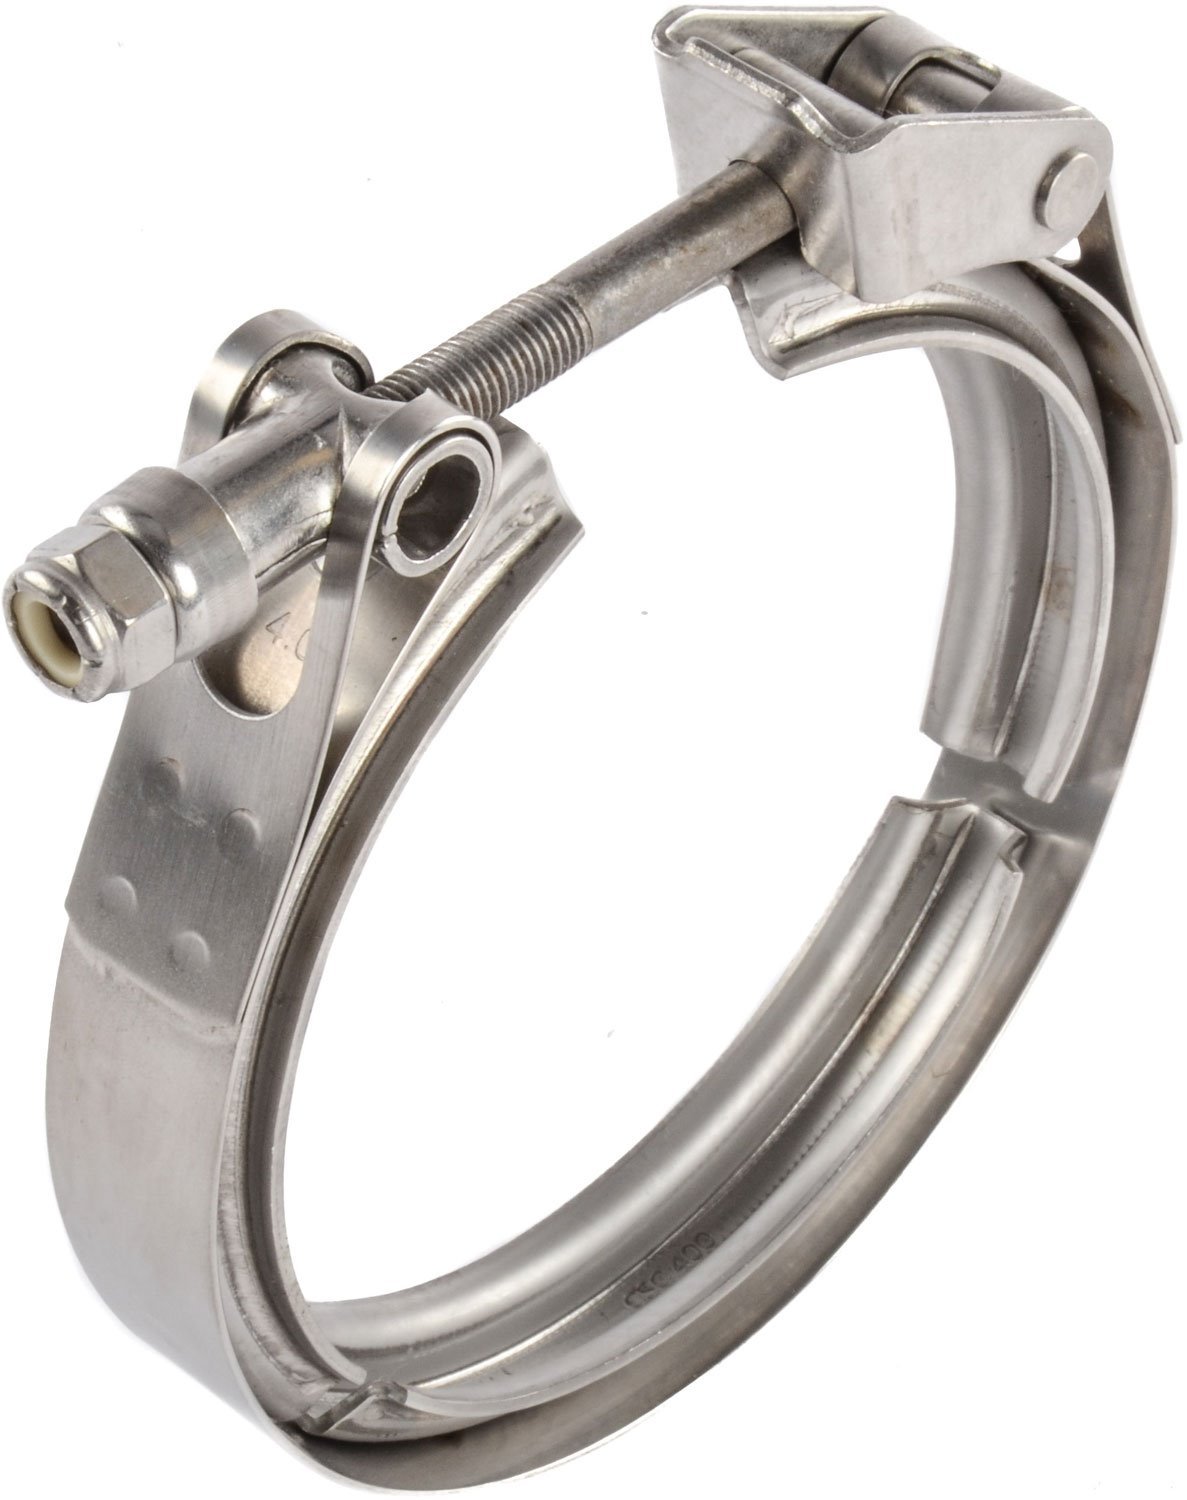 Stainless Steel Quick Release V-Band Clamp 4 in.